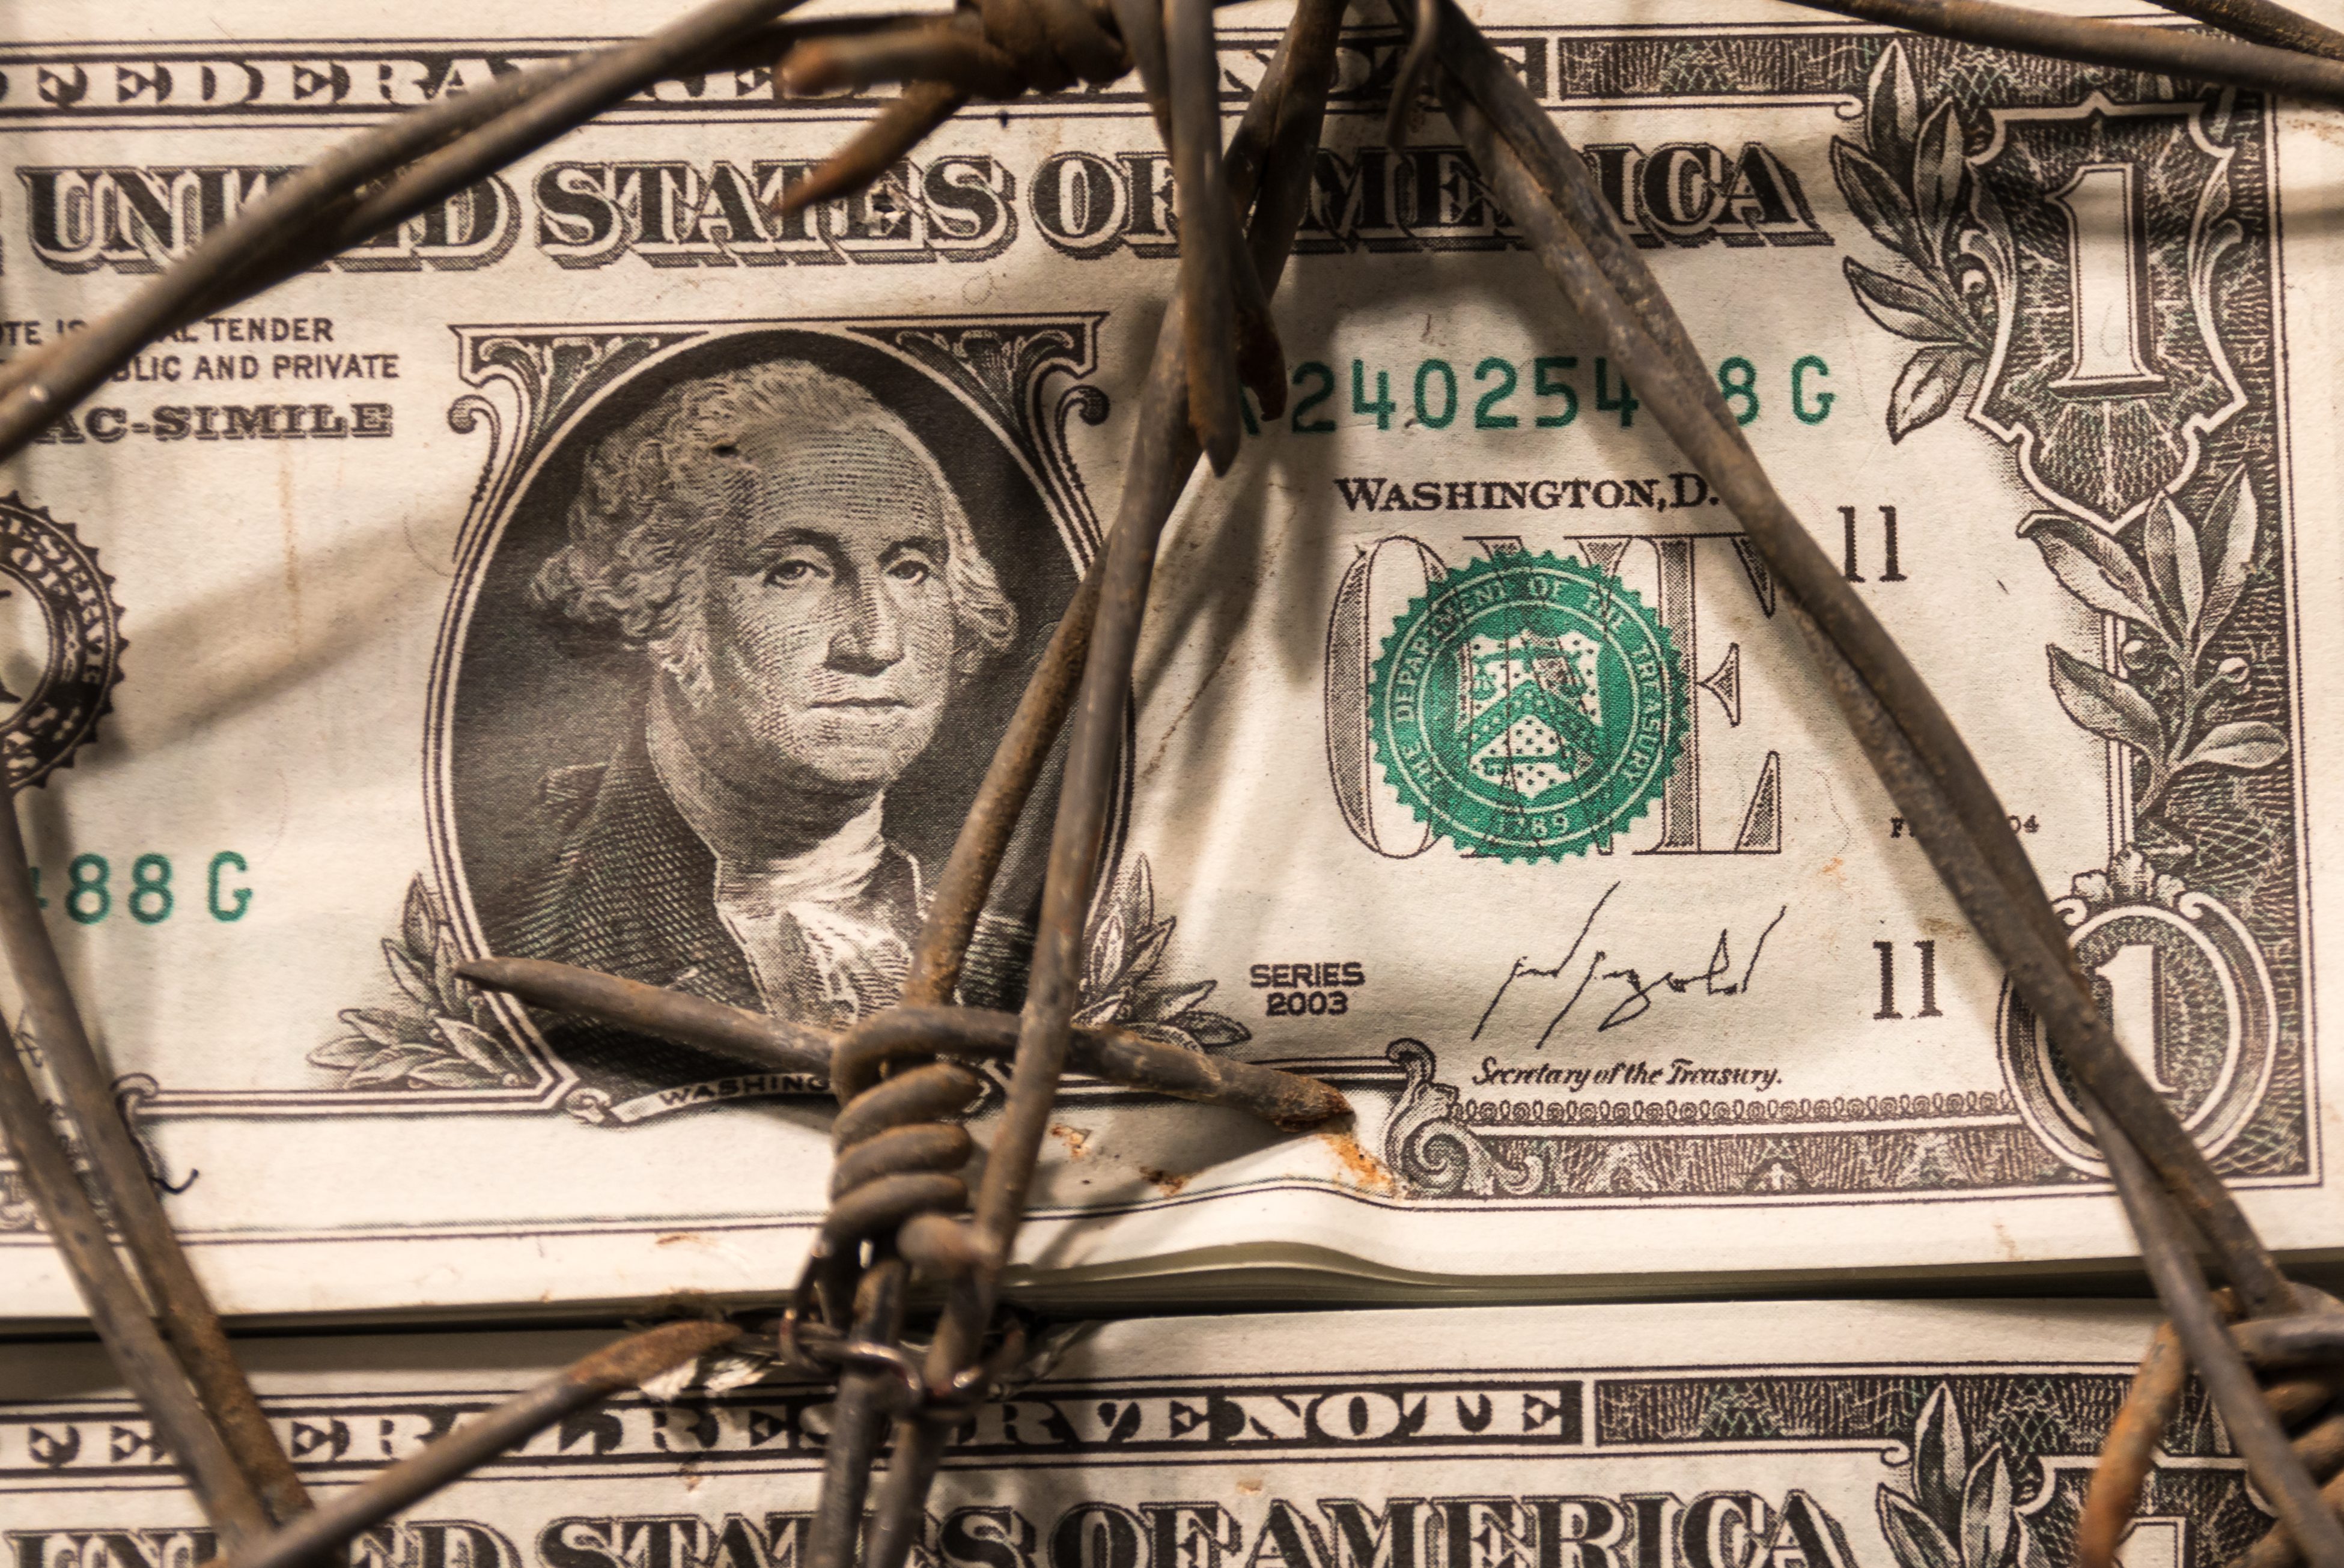 Closeup of Dollar Banknote with Barbed Wire